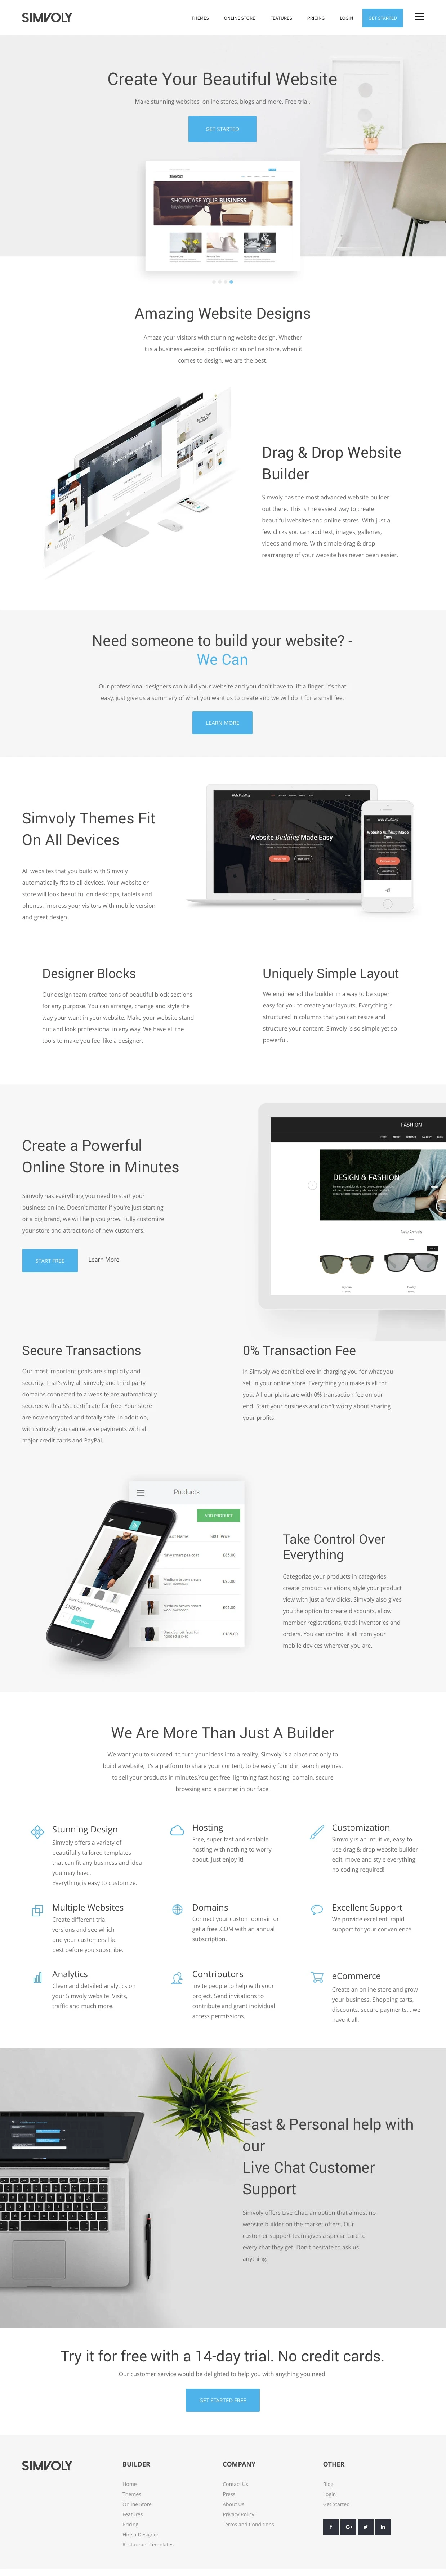 Simvoly Landing Page Example: Make stunning websites, online stores, blogs and more